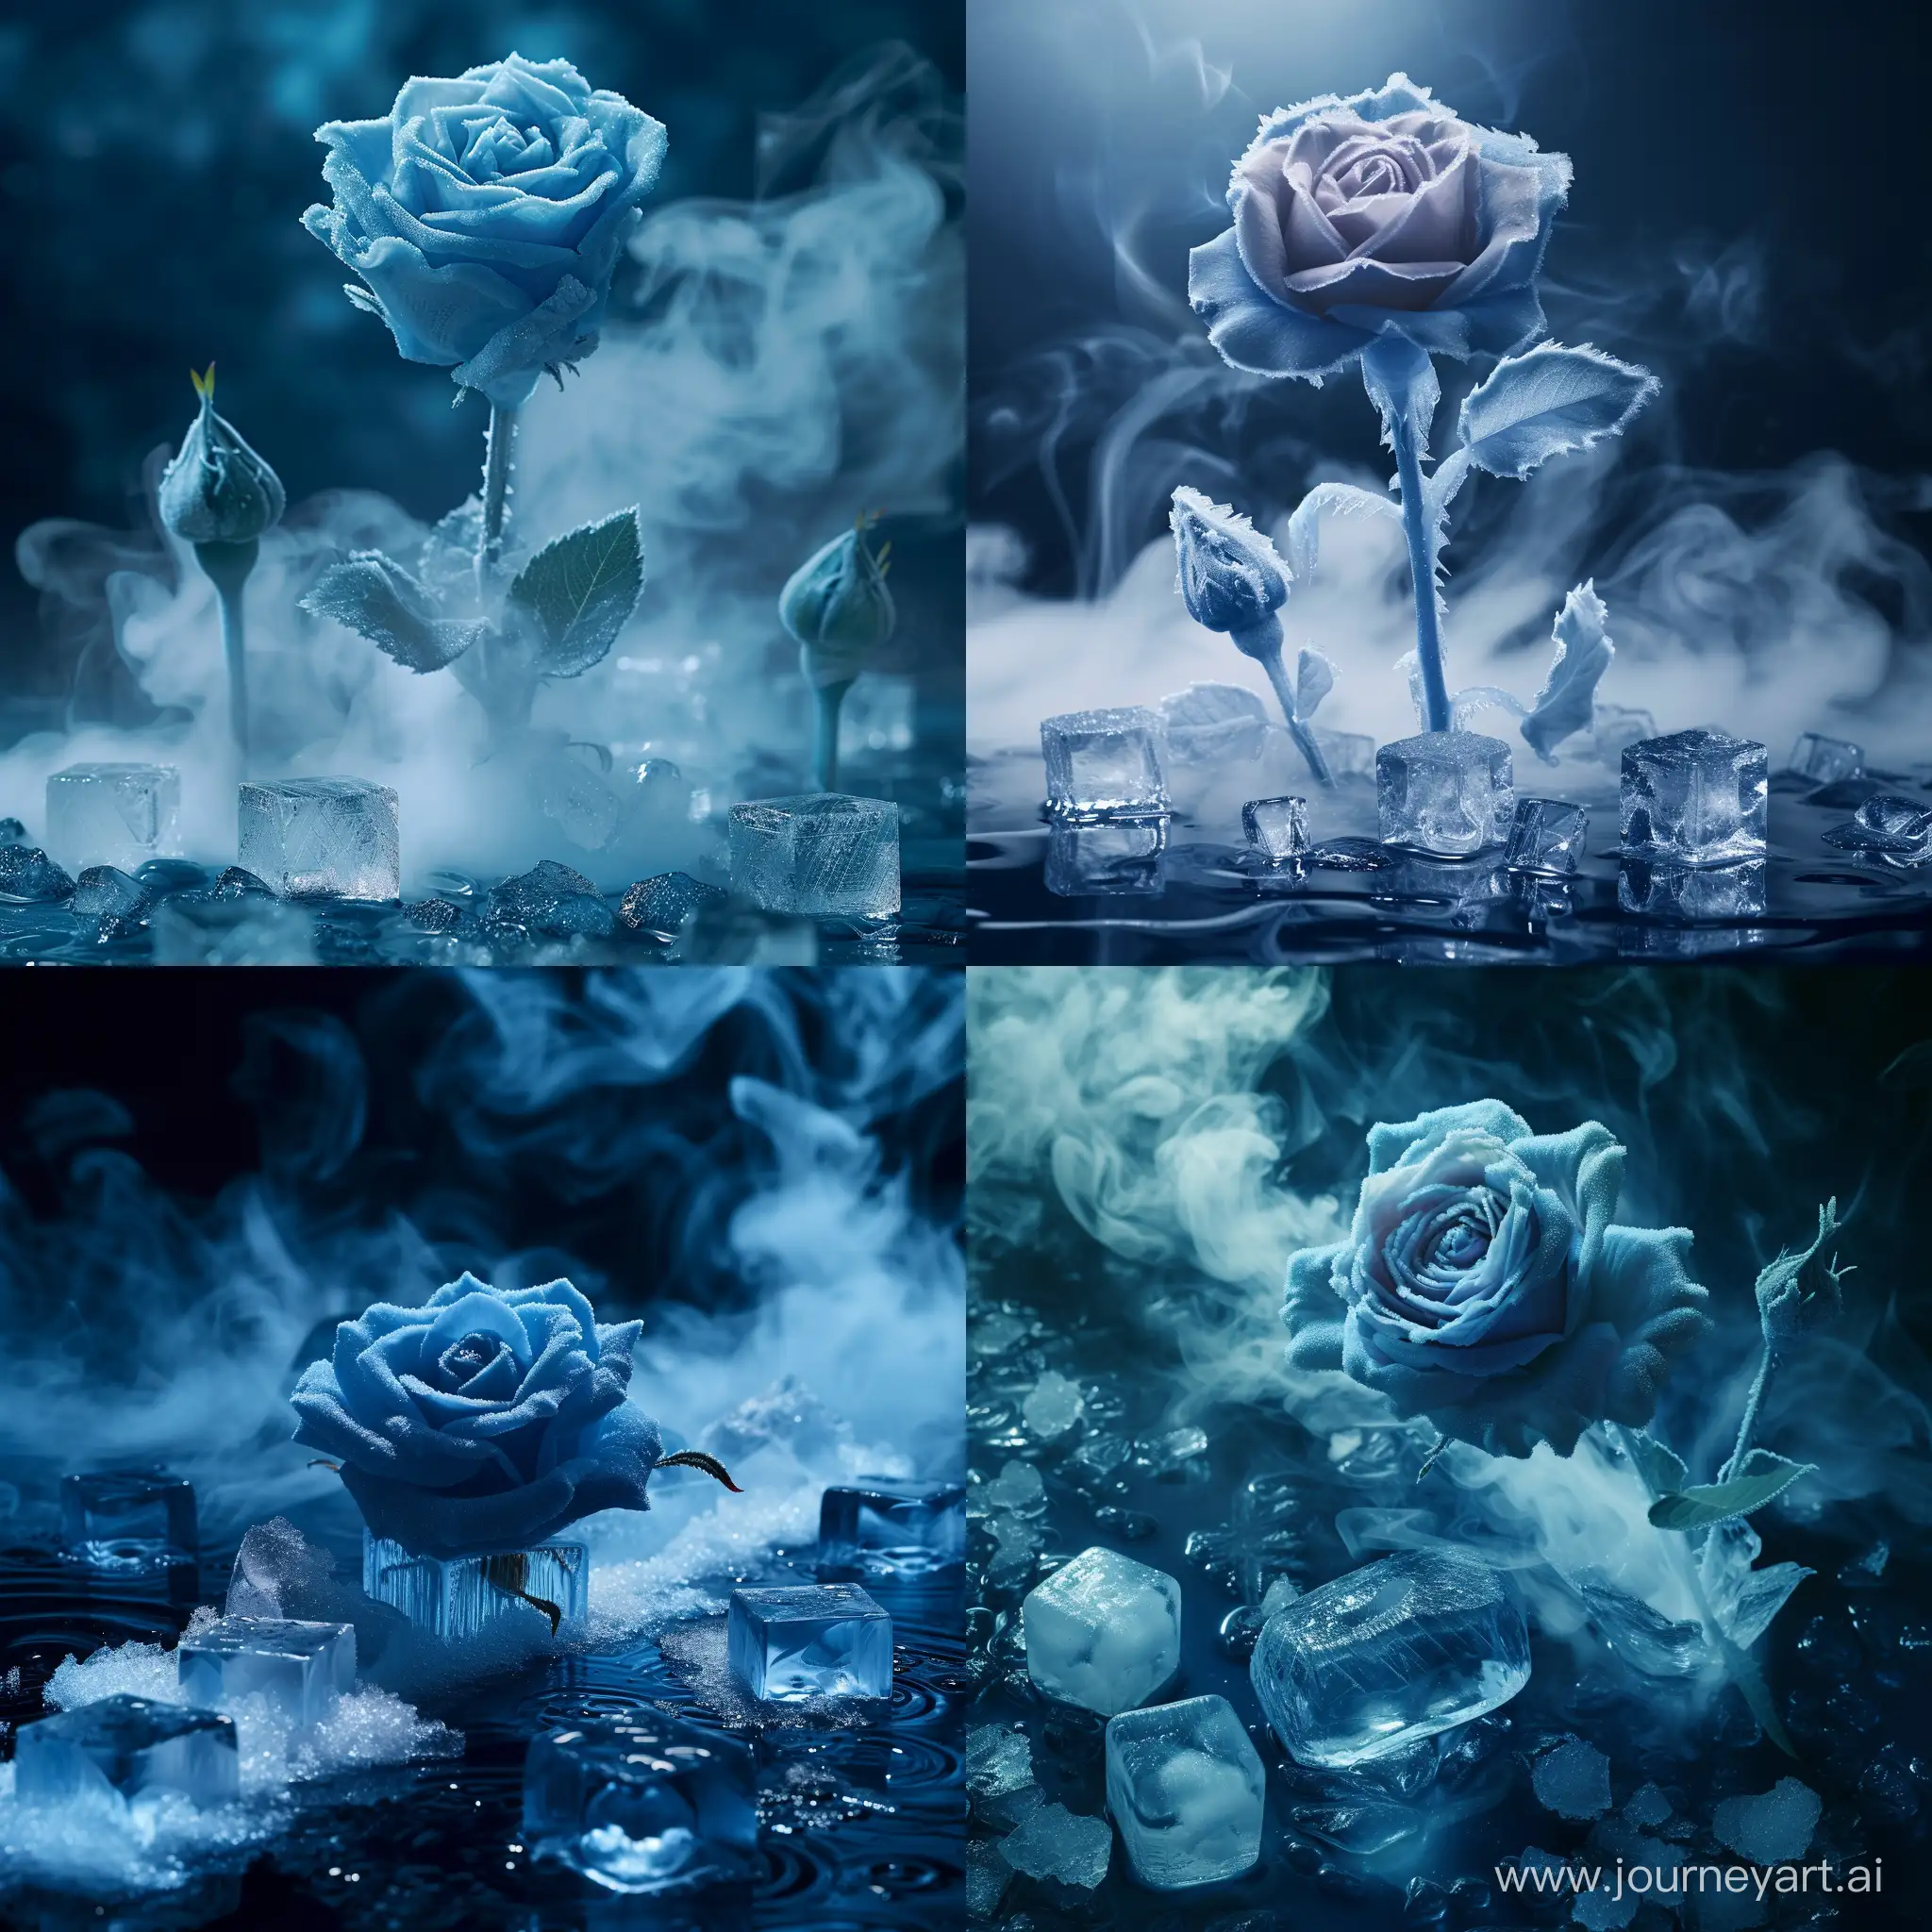 Melting-Blue-Frosted-Rose-Surrounded-by-Ice-Cubes